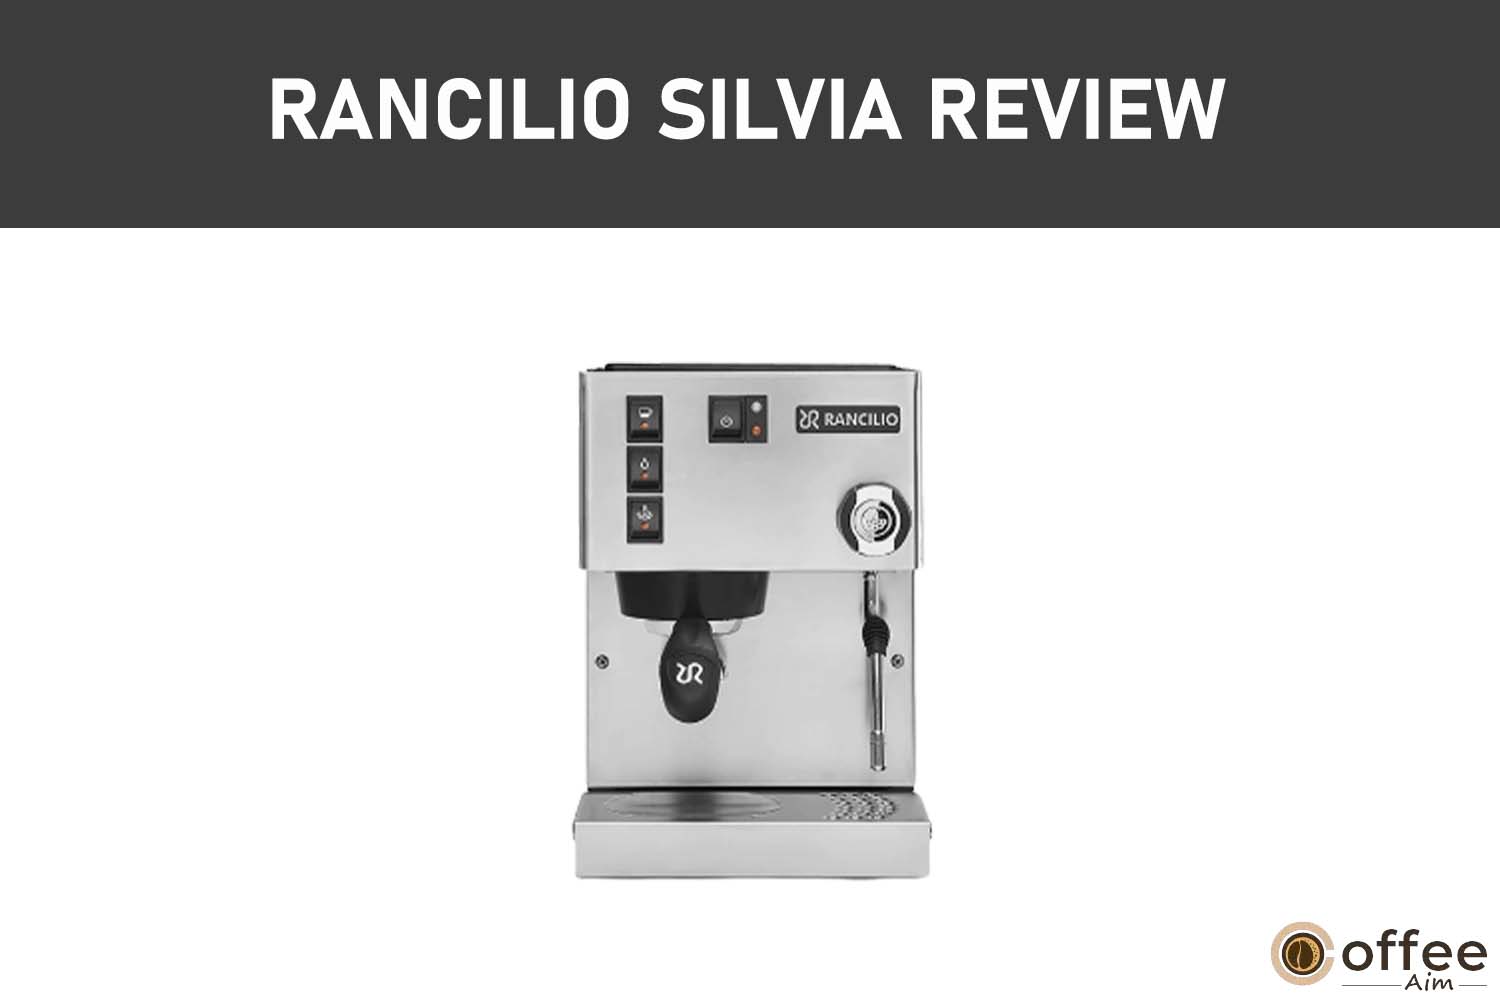 Featured image for the article "Rancilio Silvia Review"